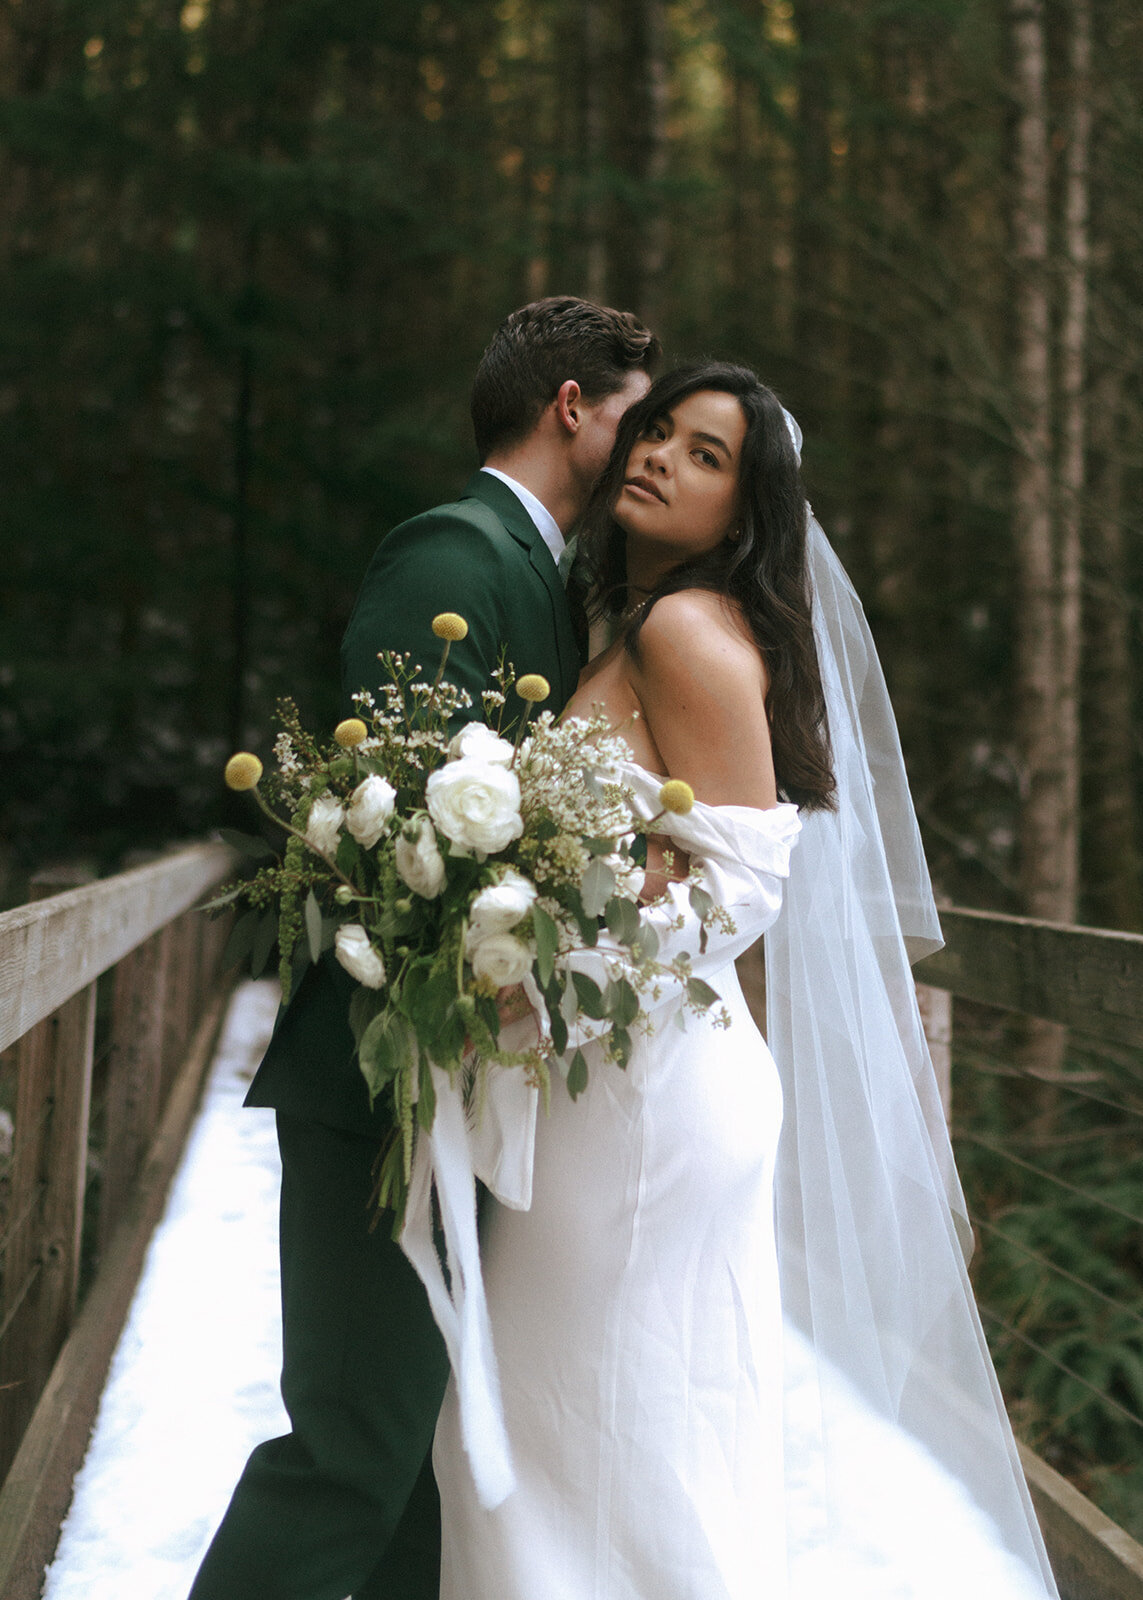 bc-vancouver-island-elopement-photographer-taylor-dawning-photography-forest-winter-boho-vintage-elopement-photos-79